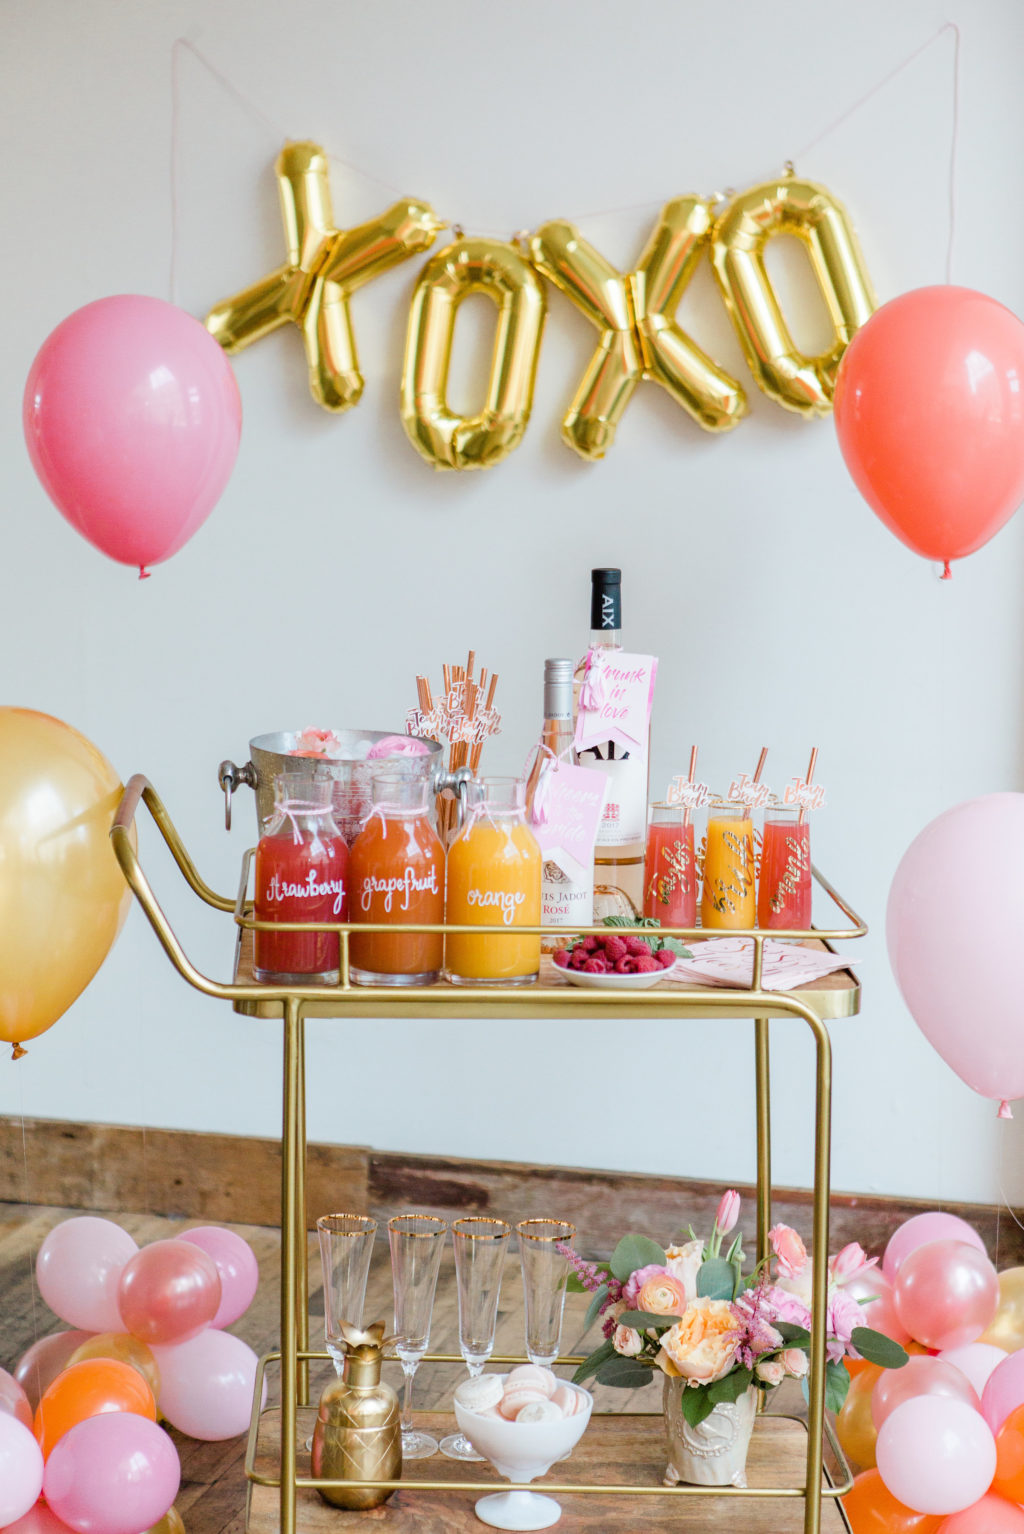 Davids Bridal bridesmaid shower inspiration Photography by Lauryn 05